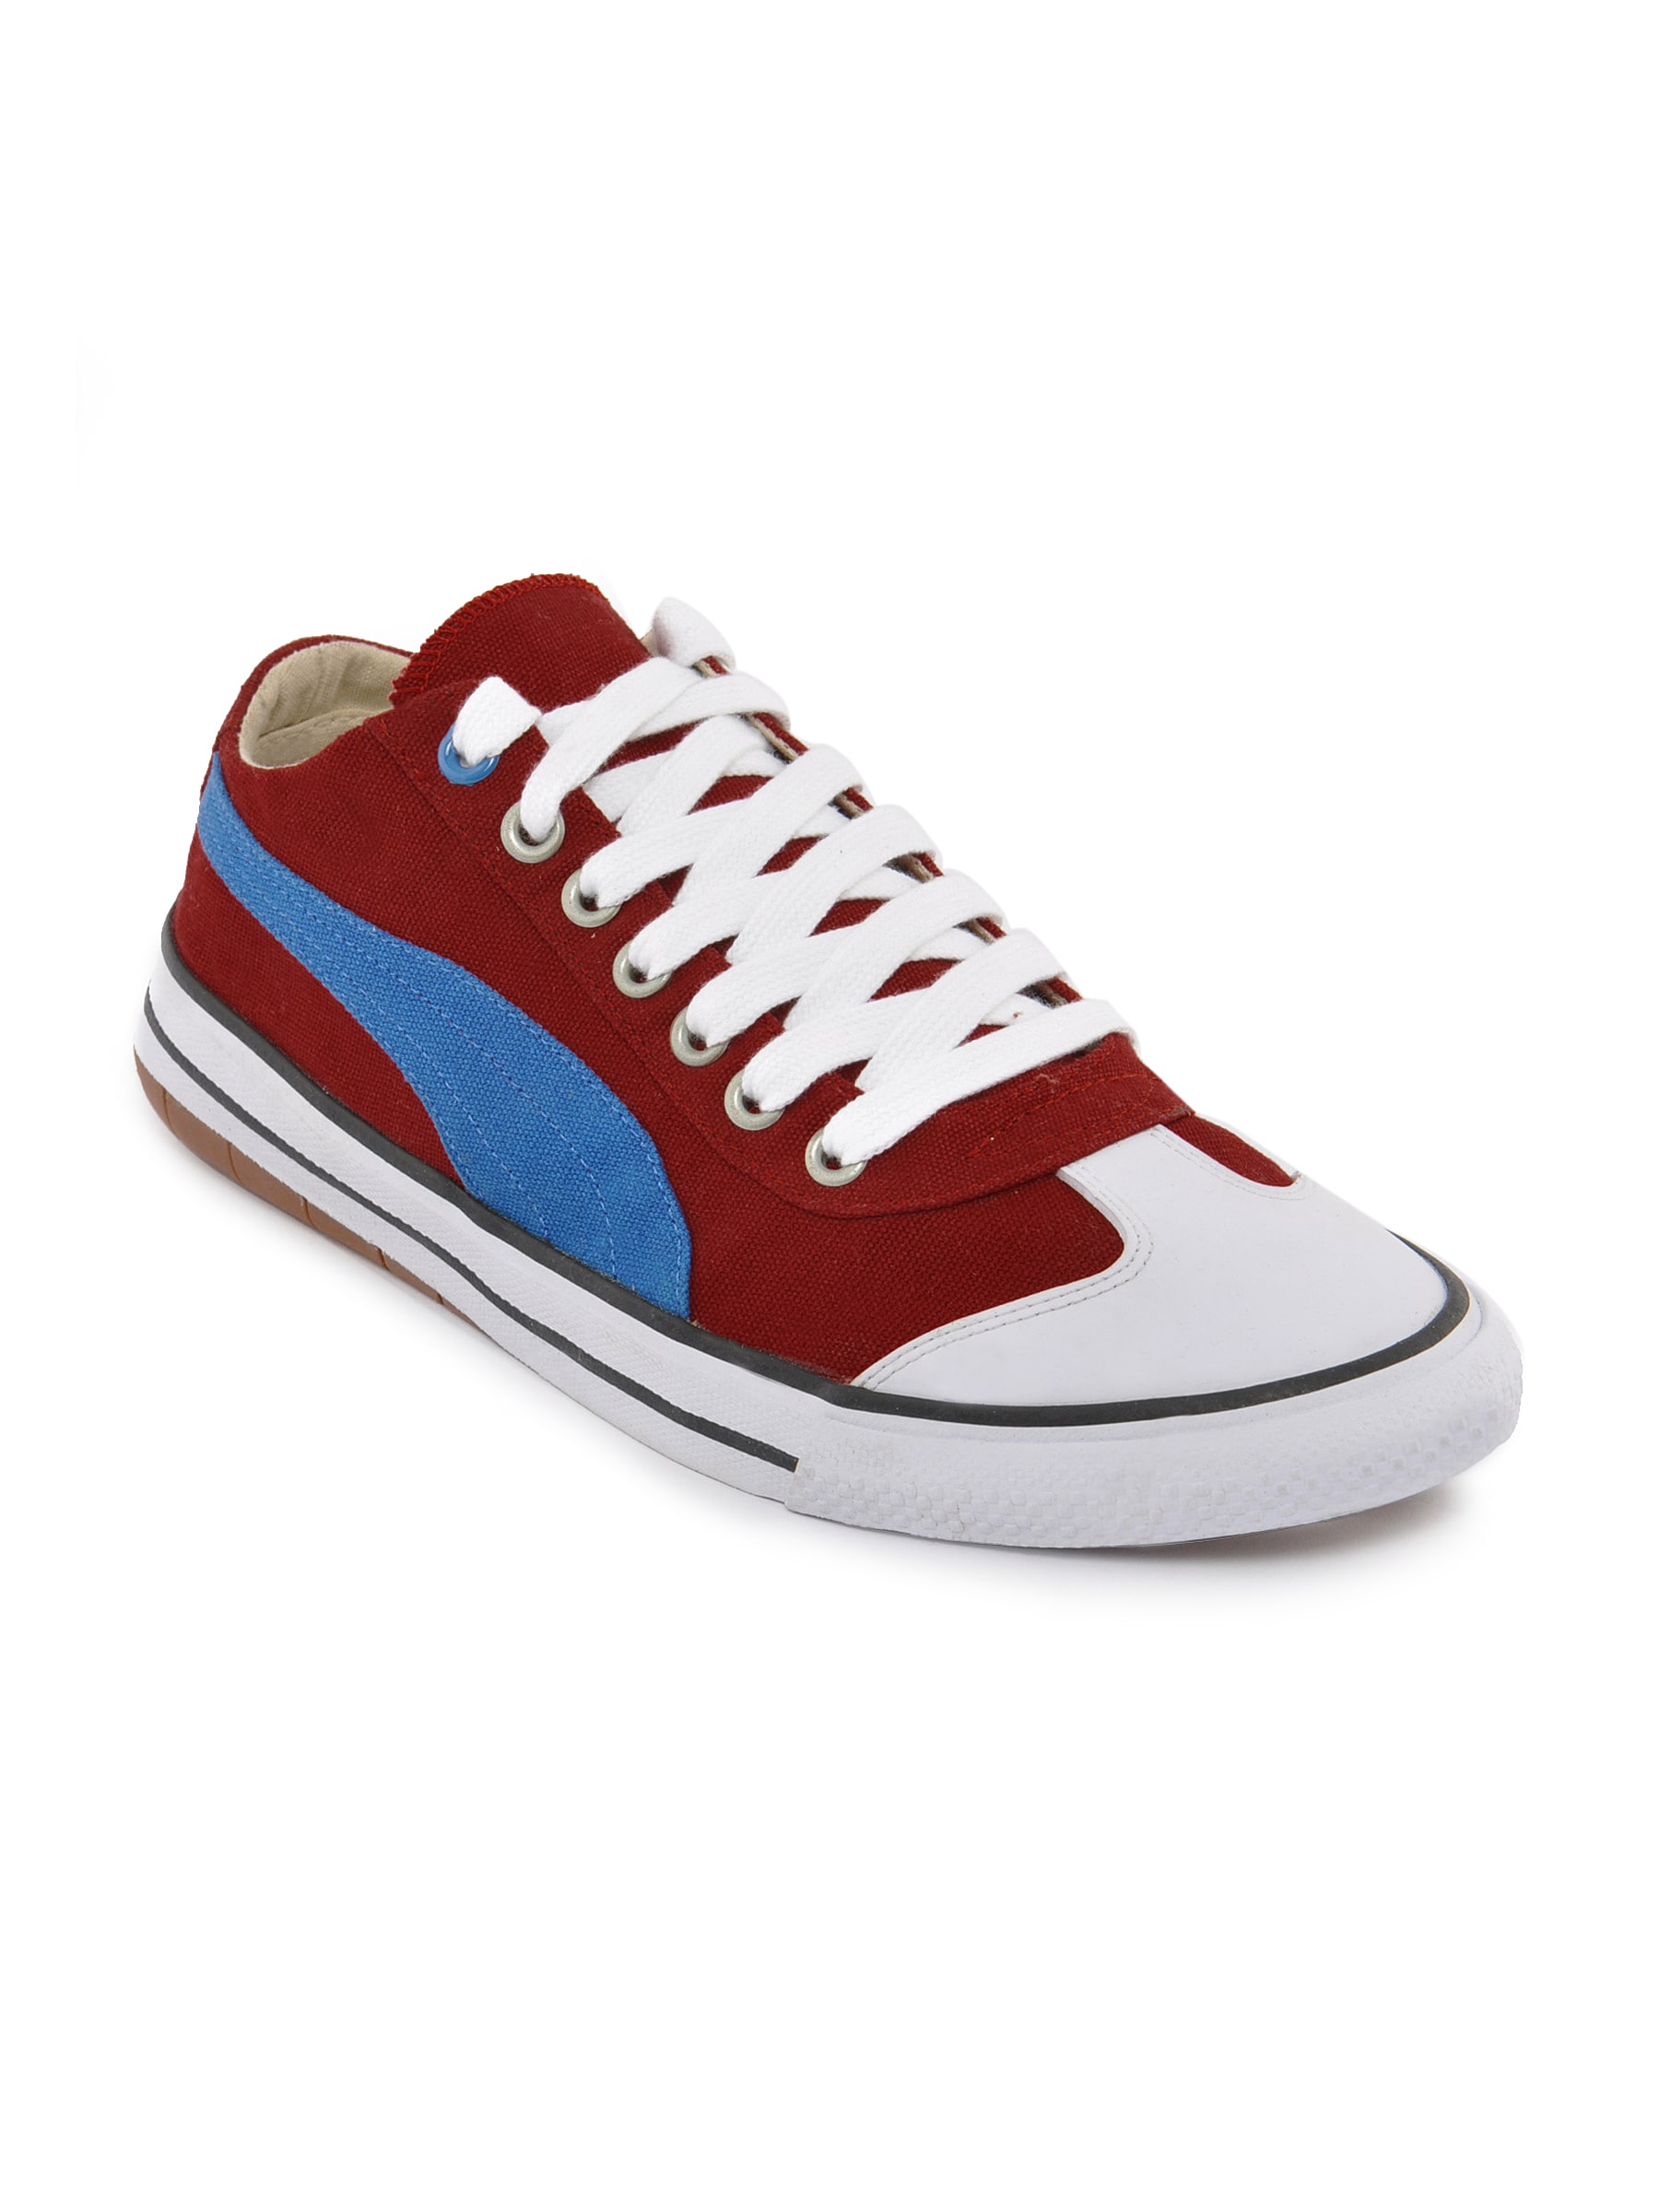 Puma Men Funpack Red Casual Shoe With Extra Lace